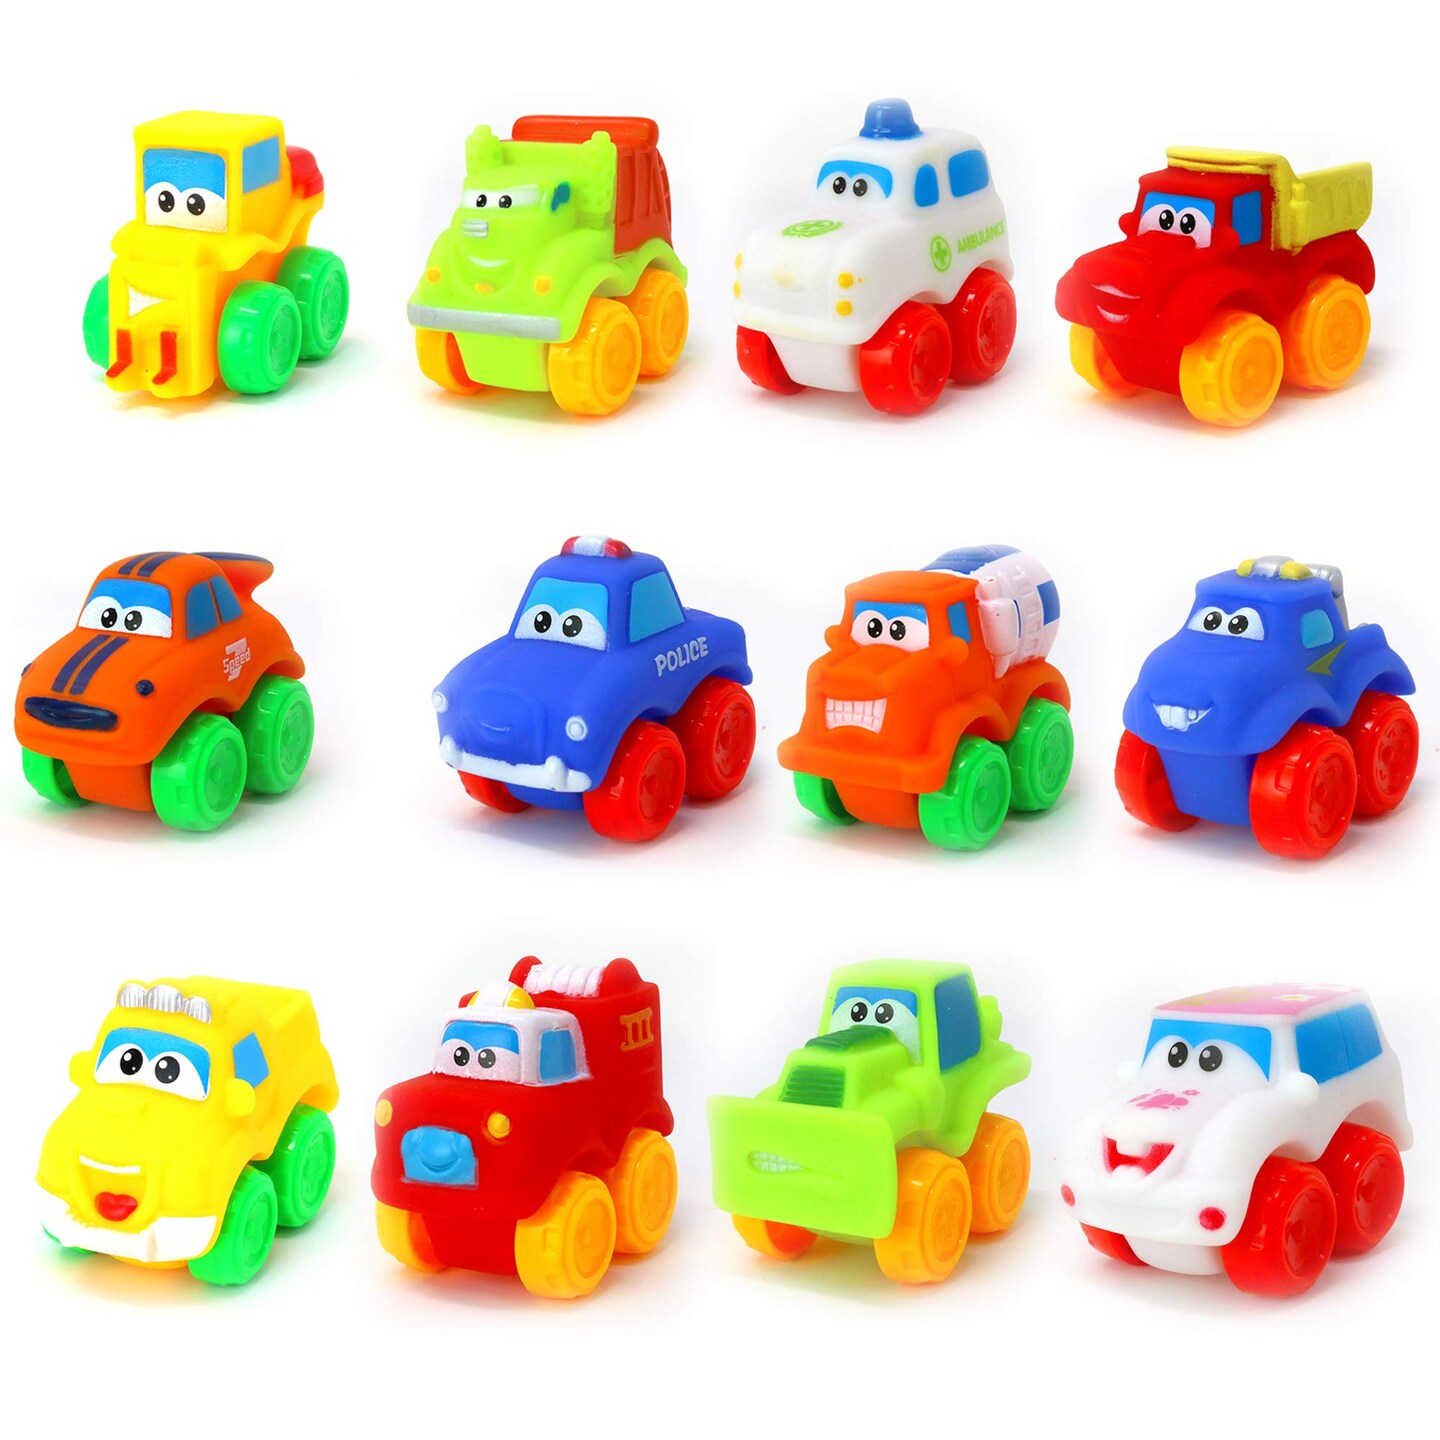 Big Mo&#x27;s Toys Baby Cars - Soft Rubber Toy Vehicles for Babies and Toddlers - 12 Pieces